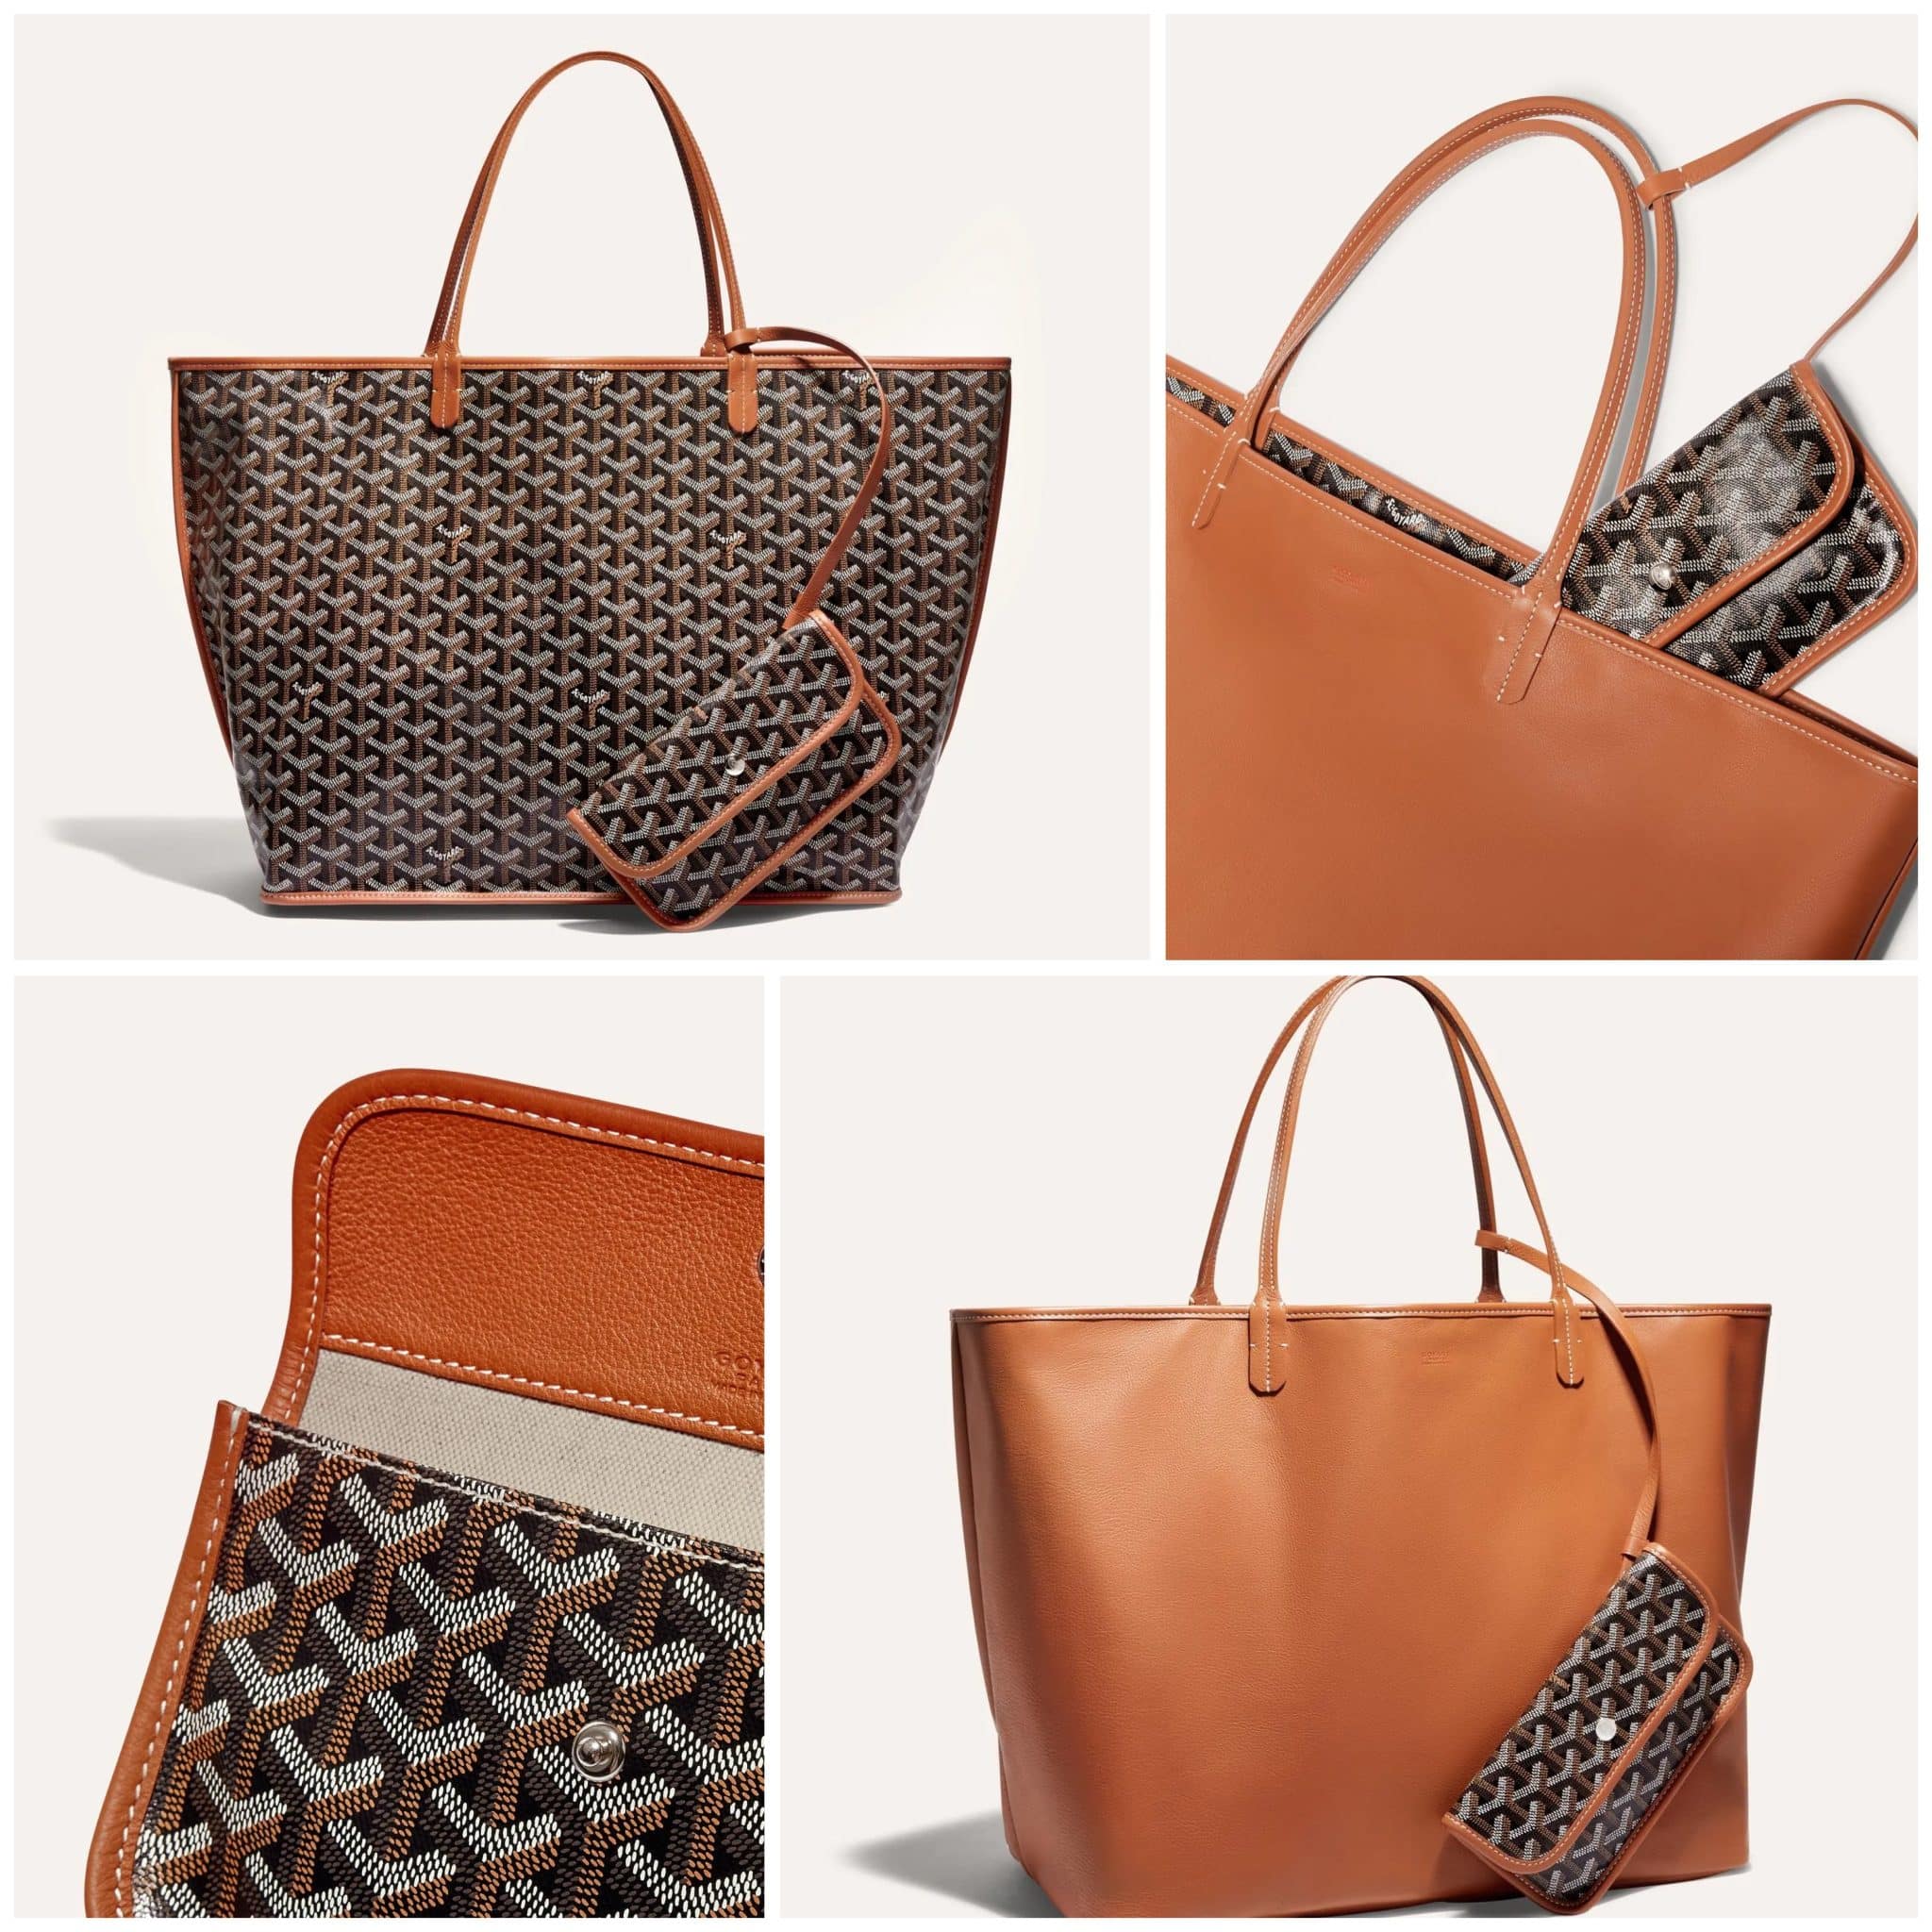 Goyard Tote: The Specific Difference Between All Goyard Totes